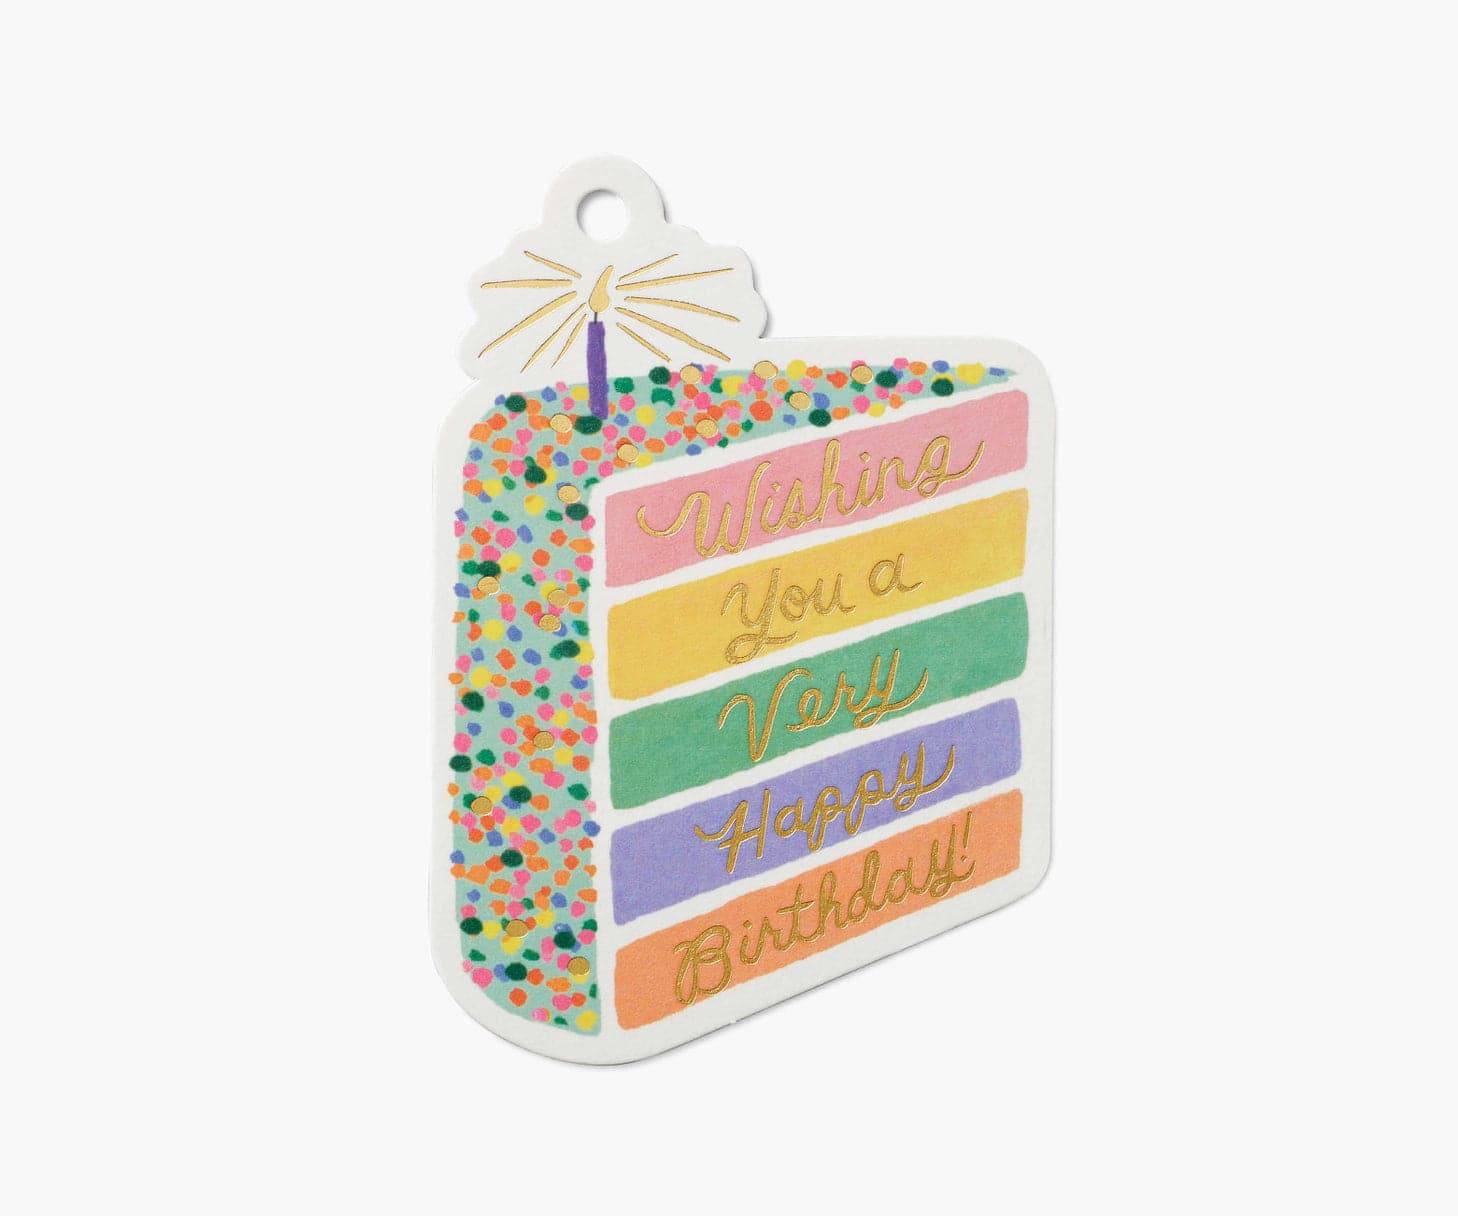 Cake Slice Die-Cut Gift Tags - The Preppy Bunny